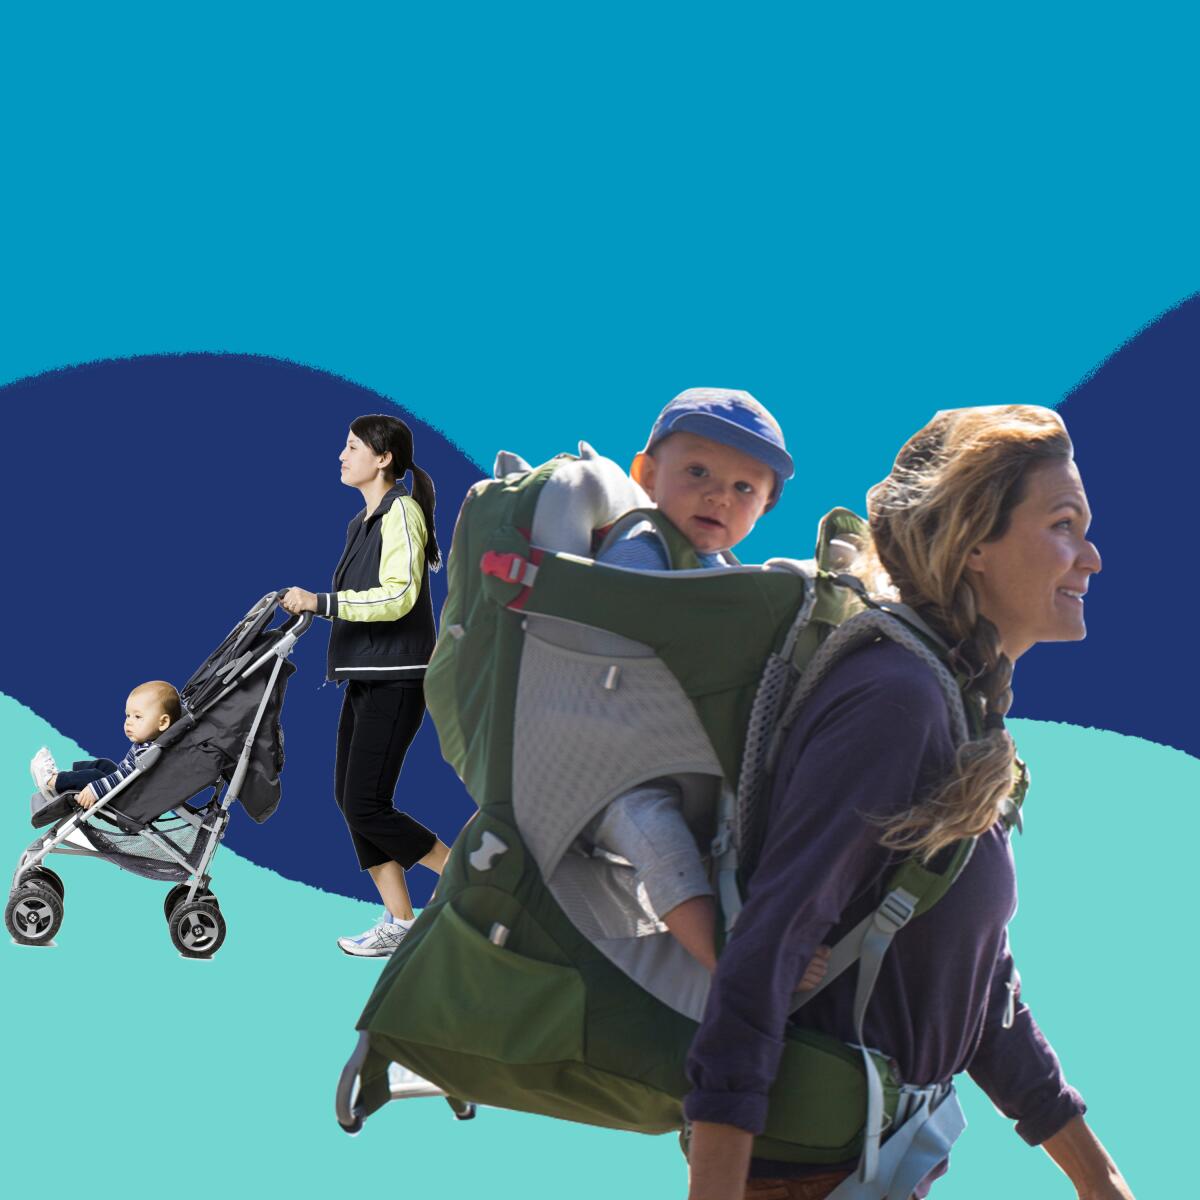 Illustration of a woman pushing a stroller and a woman with a baby in a backpack